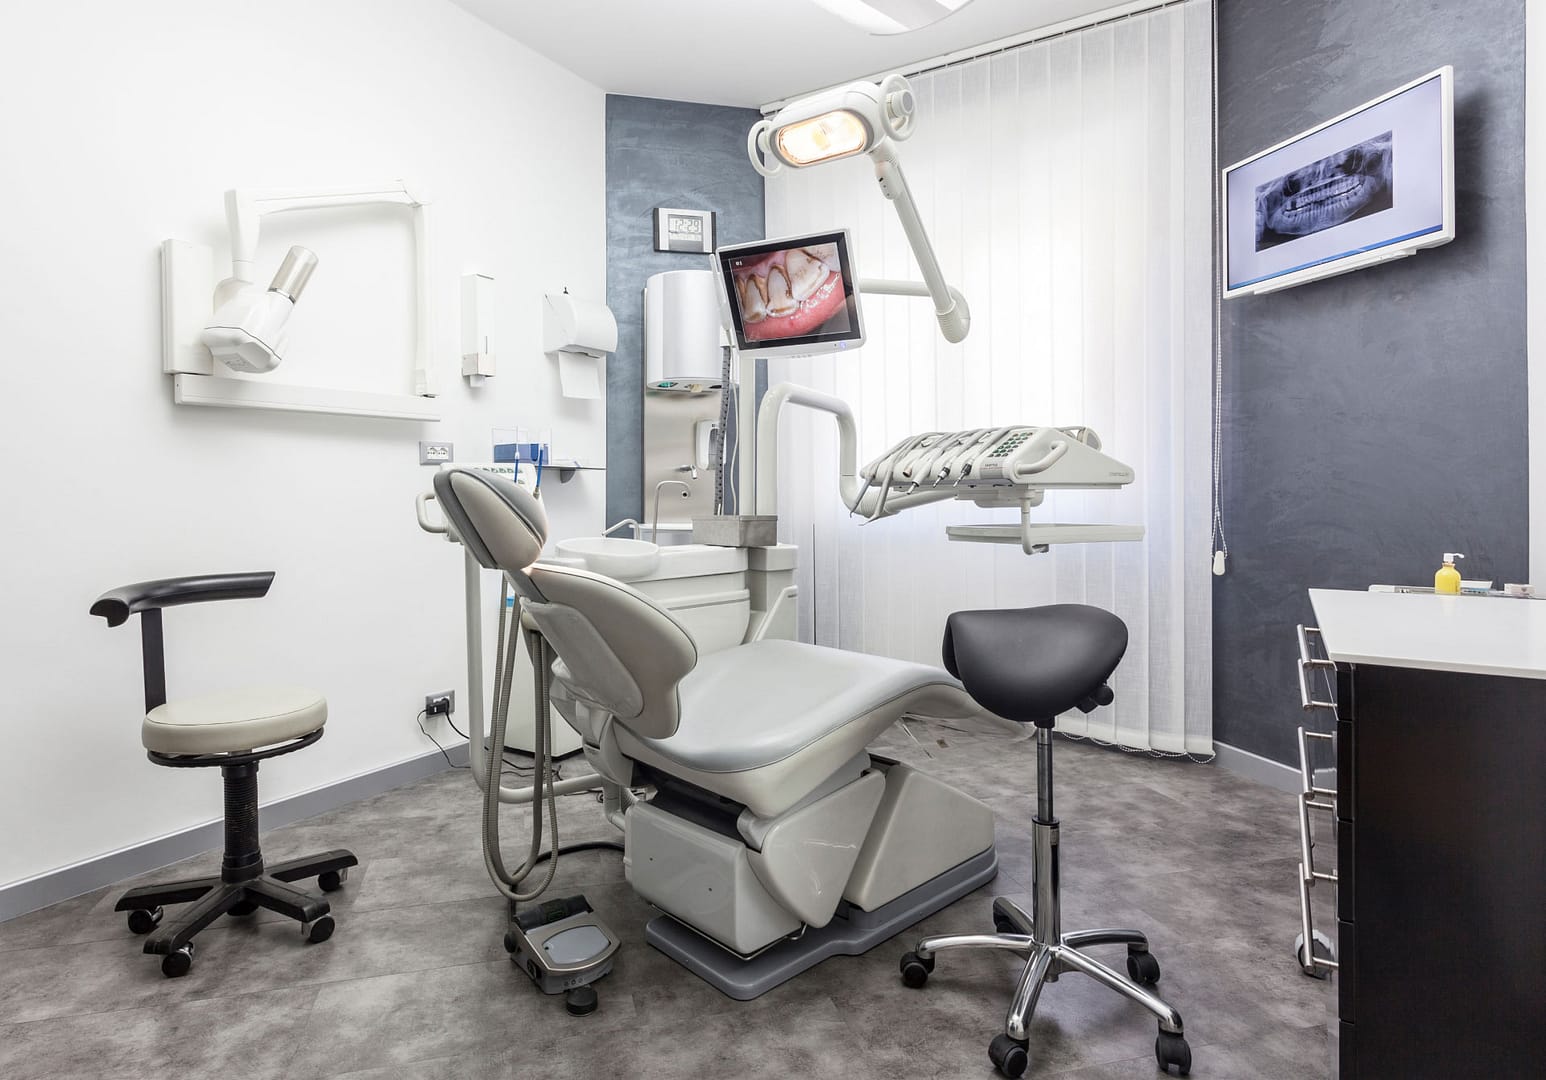 dental exam room with chair and equipment